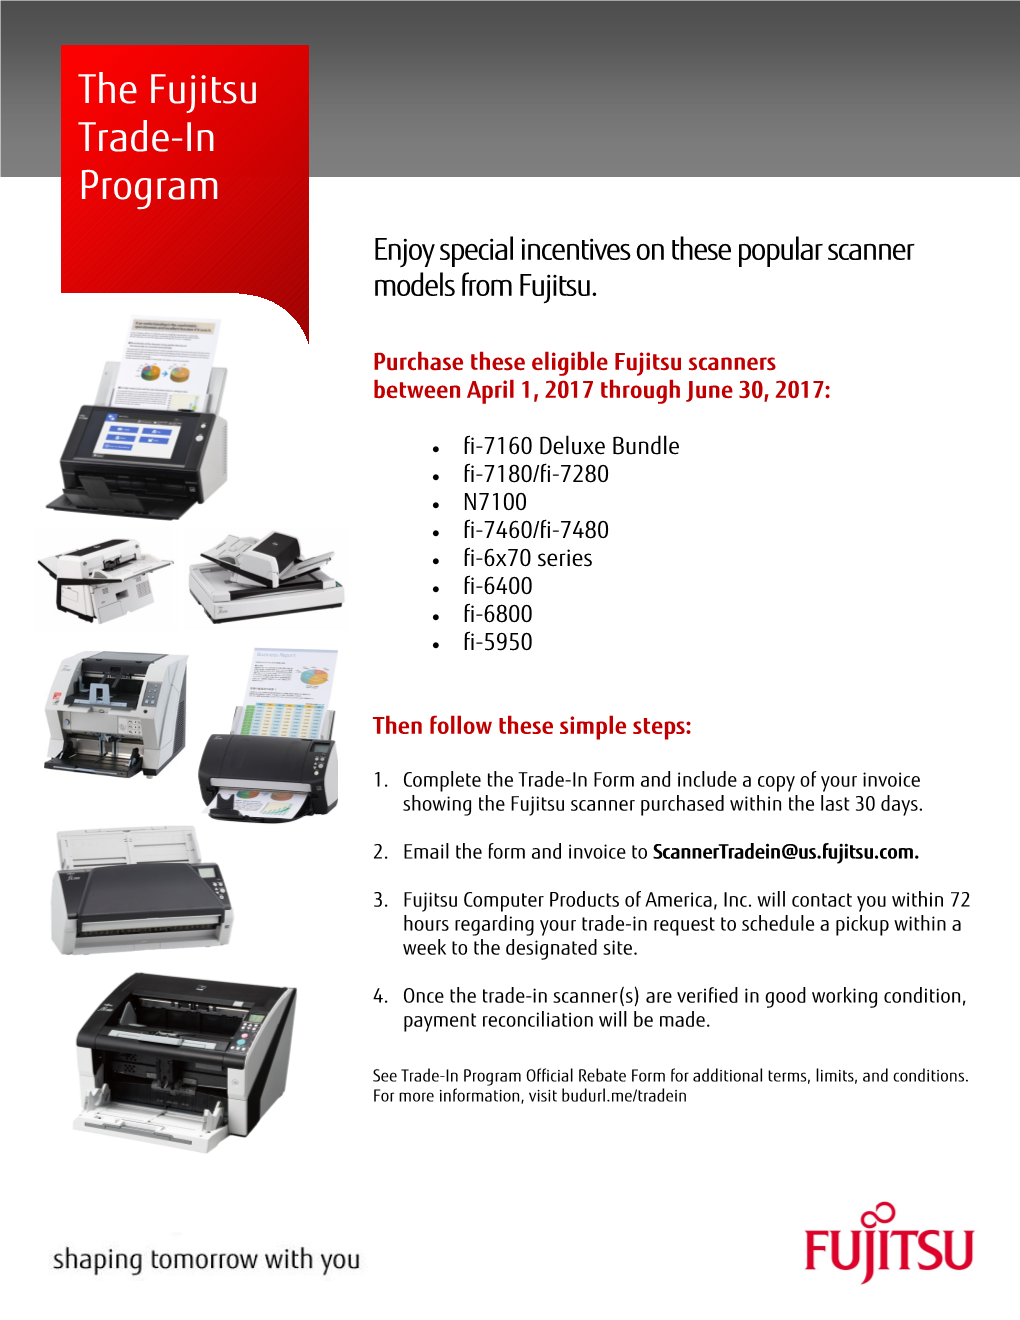 The Fujitsu Trade-In Program Enjoy Special Incentives on These Popular Scanner Models from Fujitsu